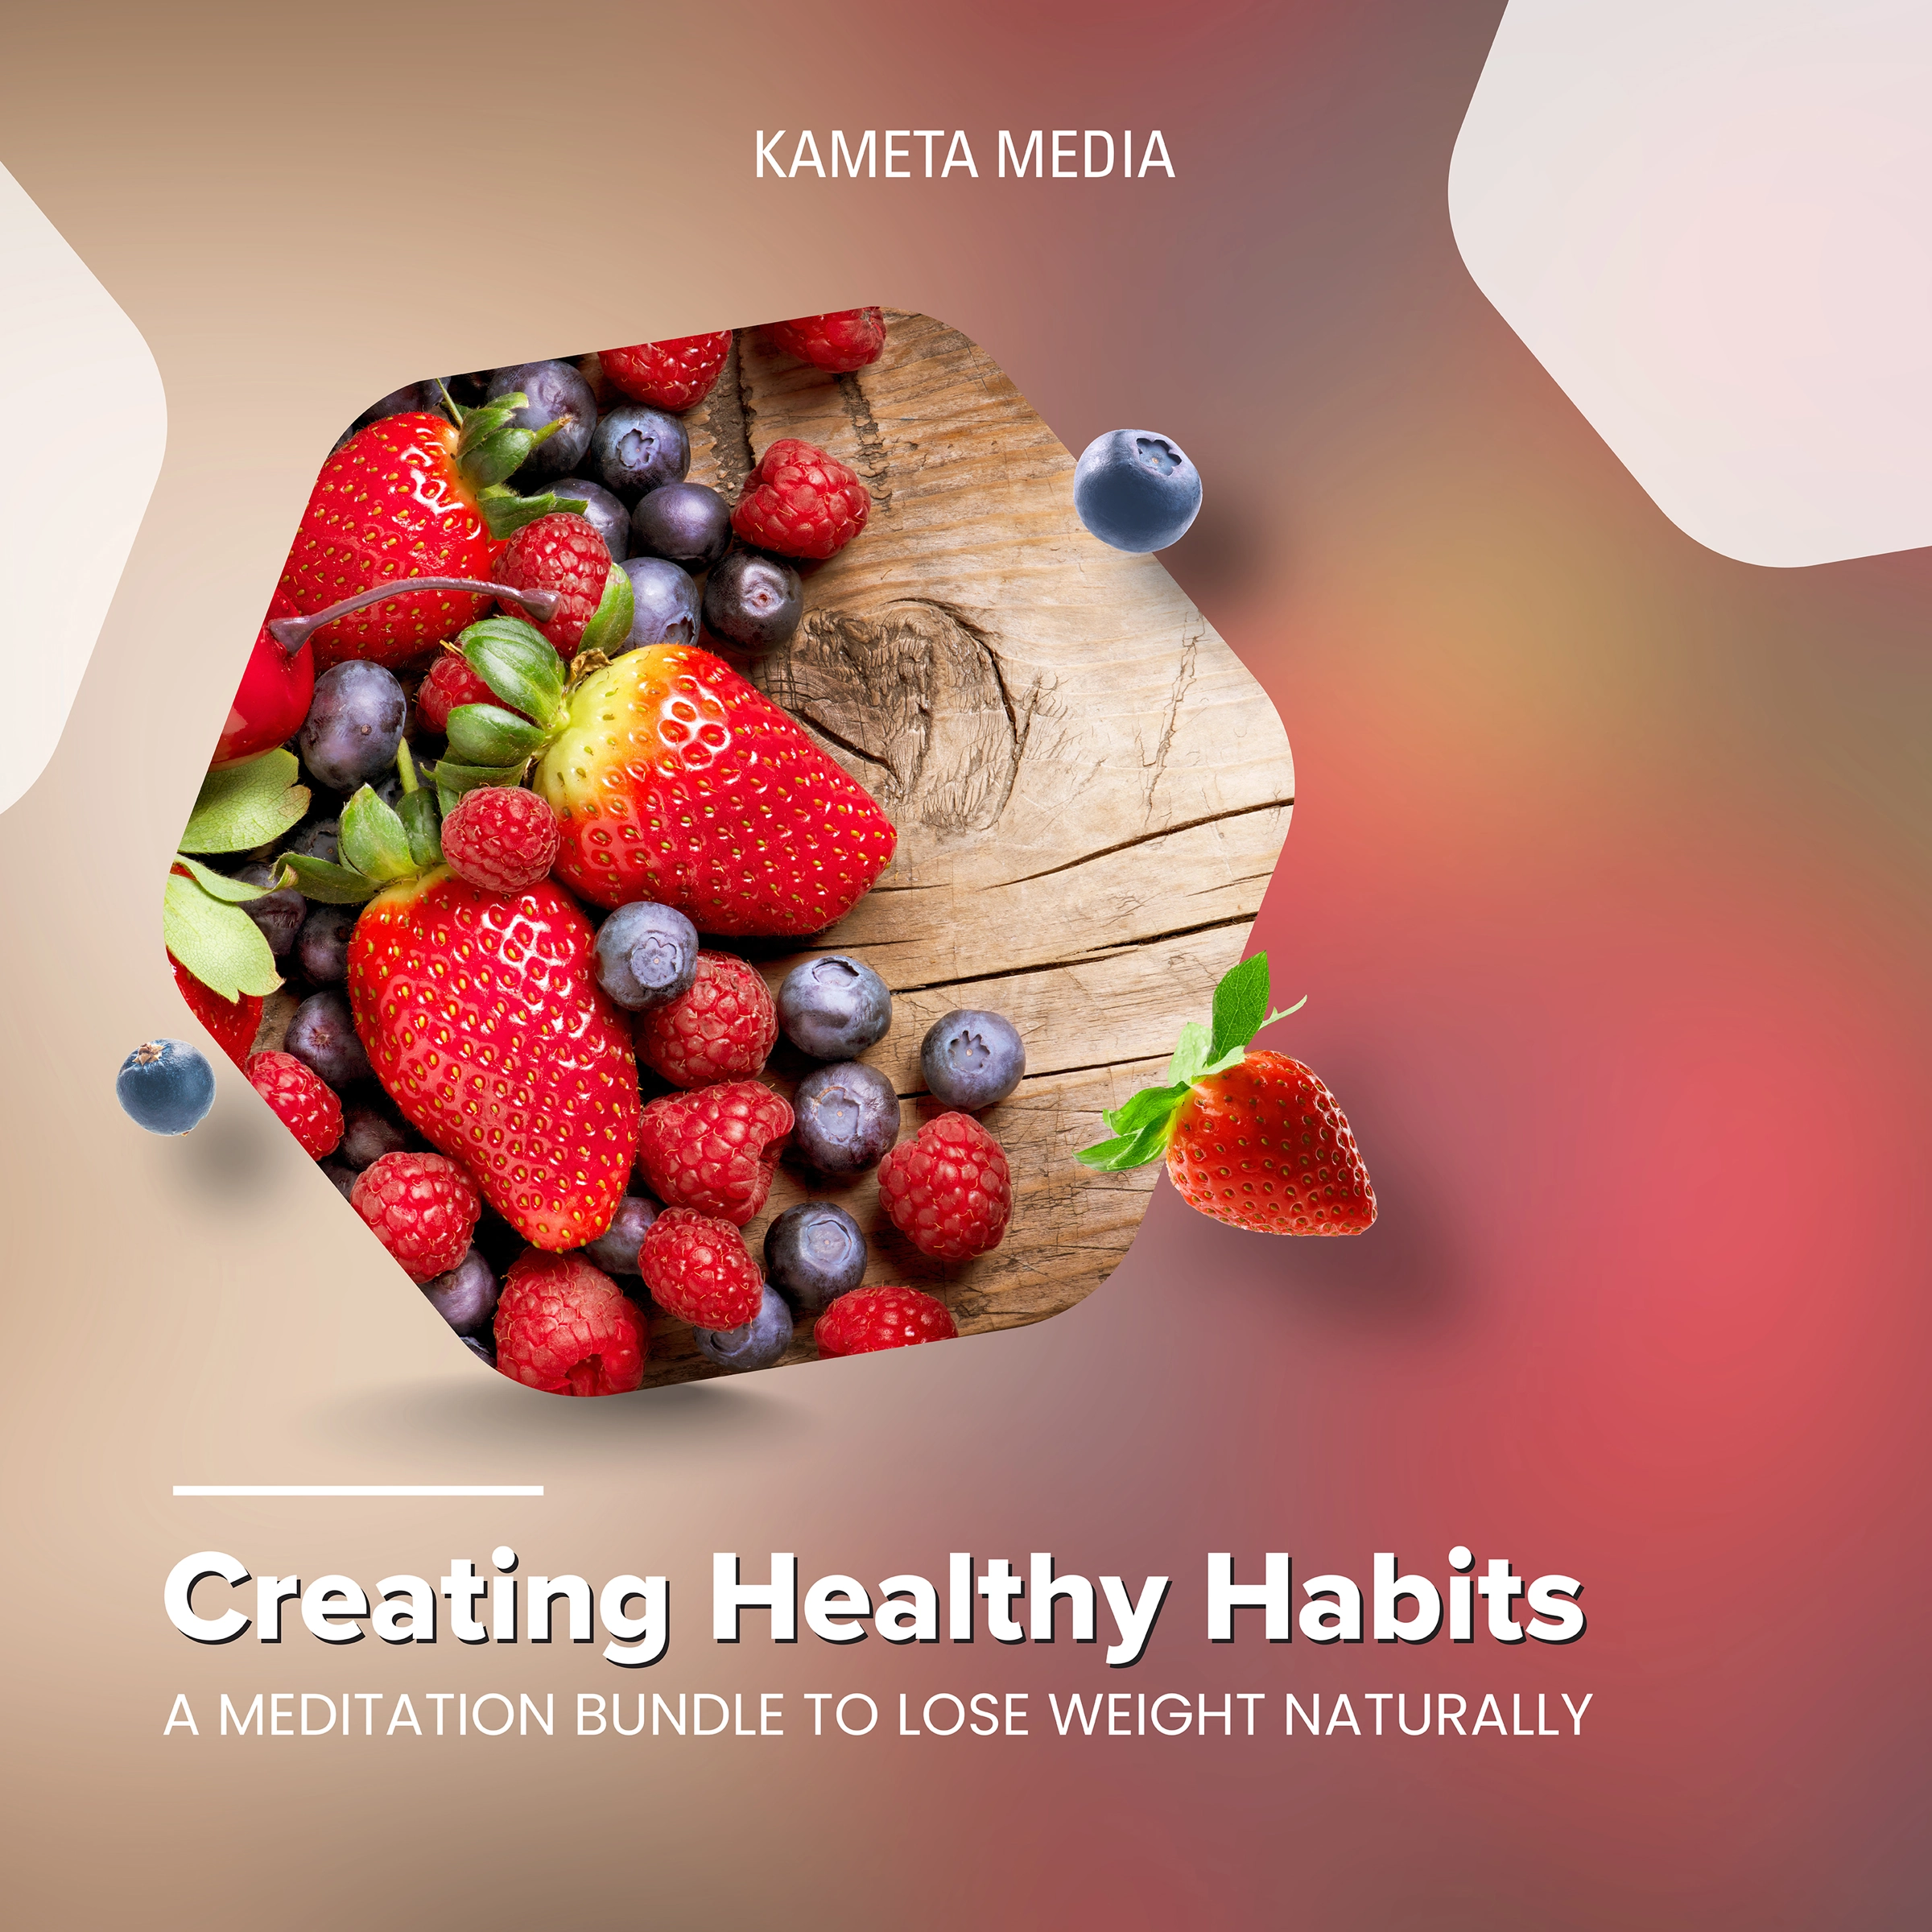 Creating Healthy Habits: A Meditation Bundle to Lose Weight Naturally Audiobook by Kameta Media